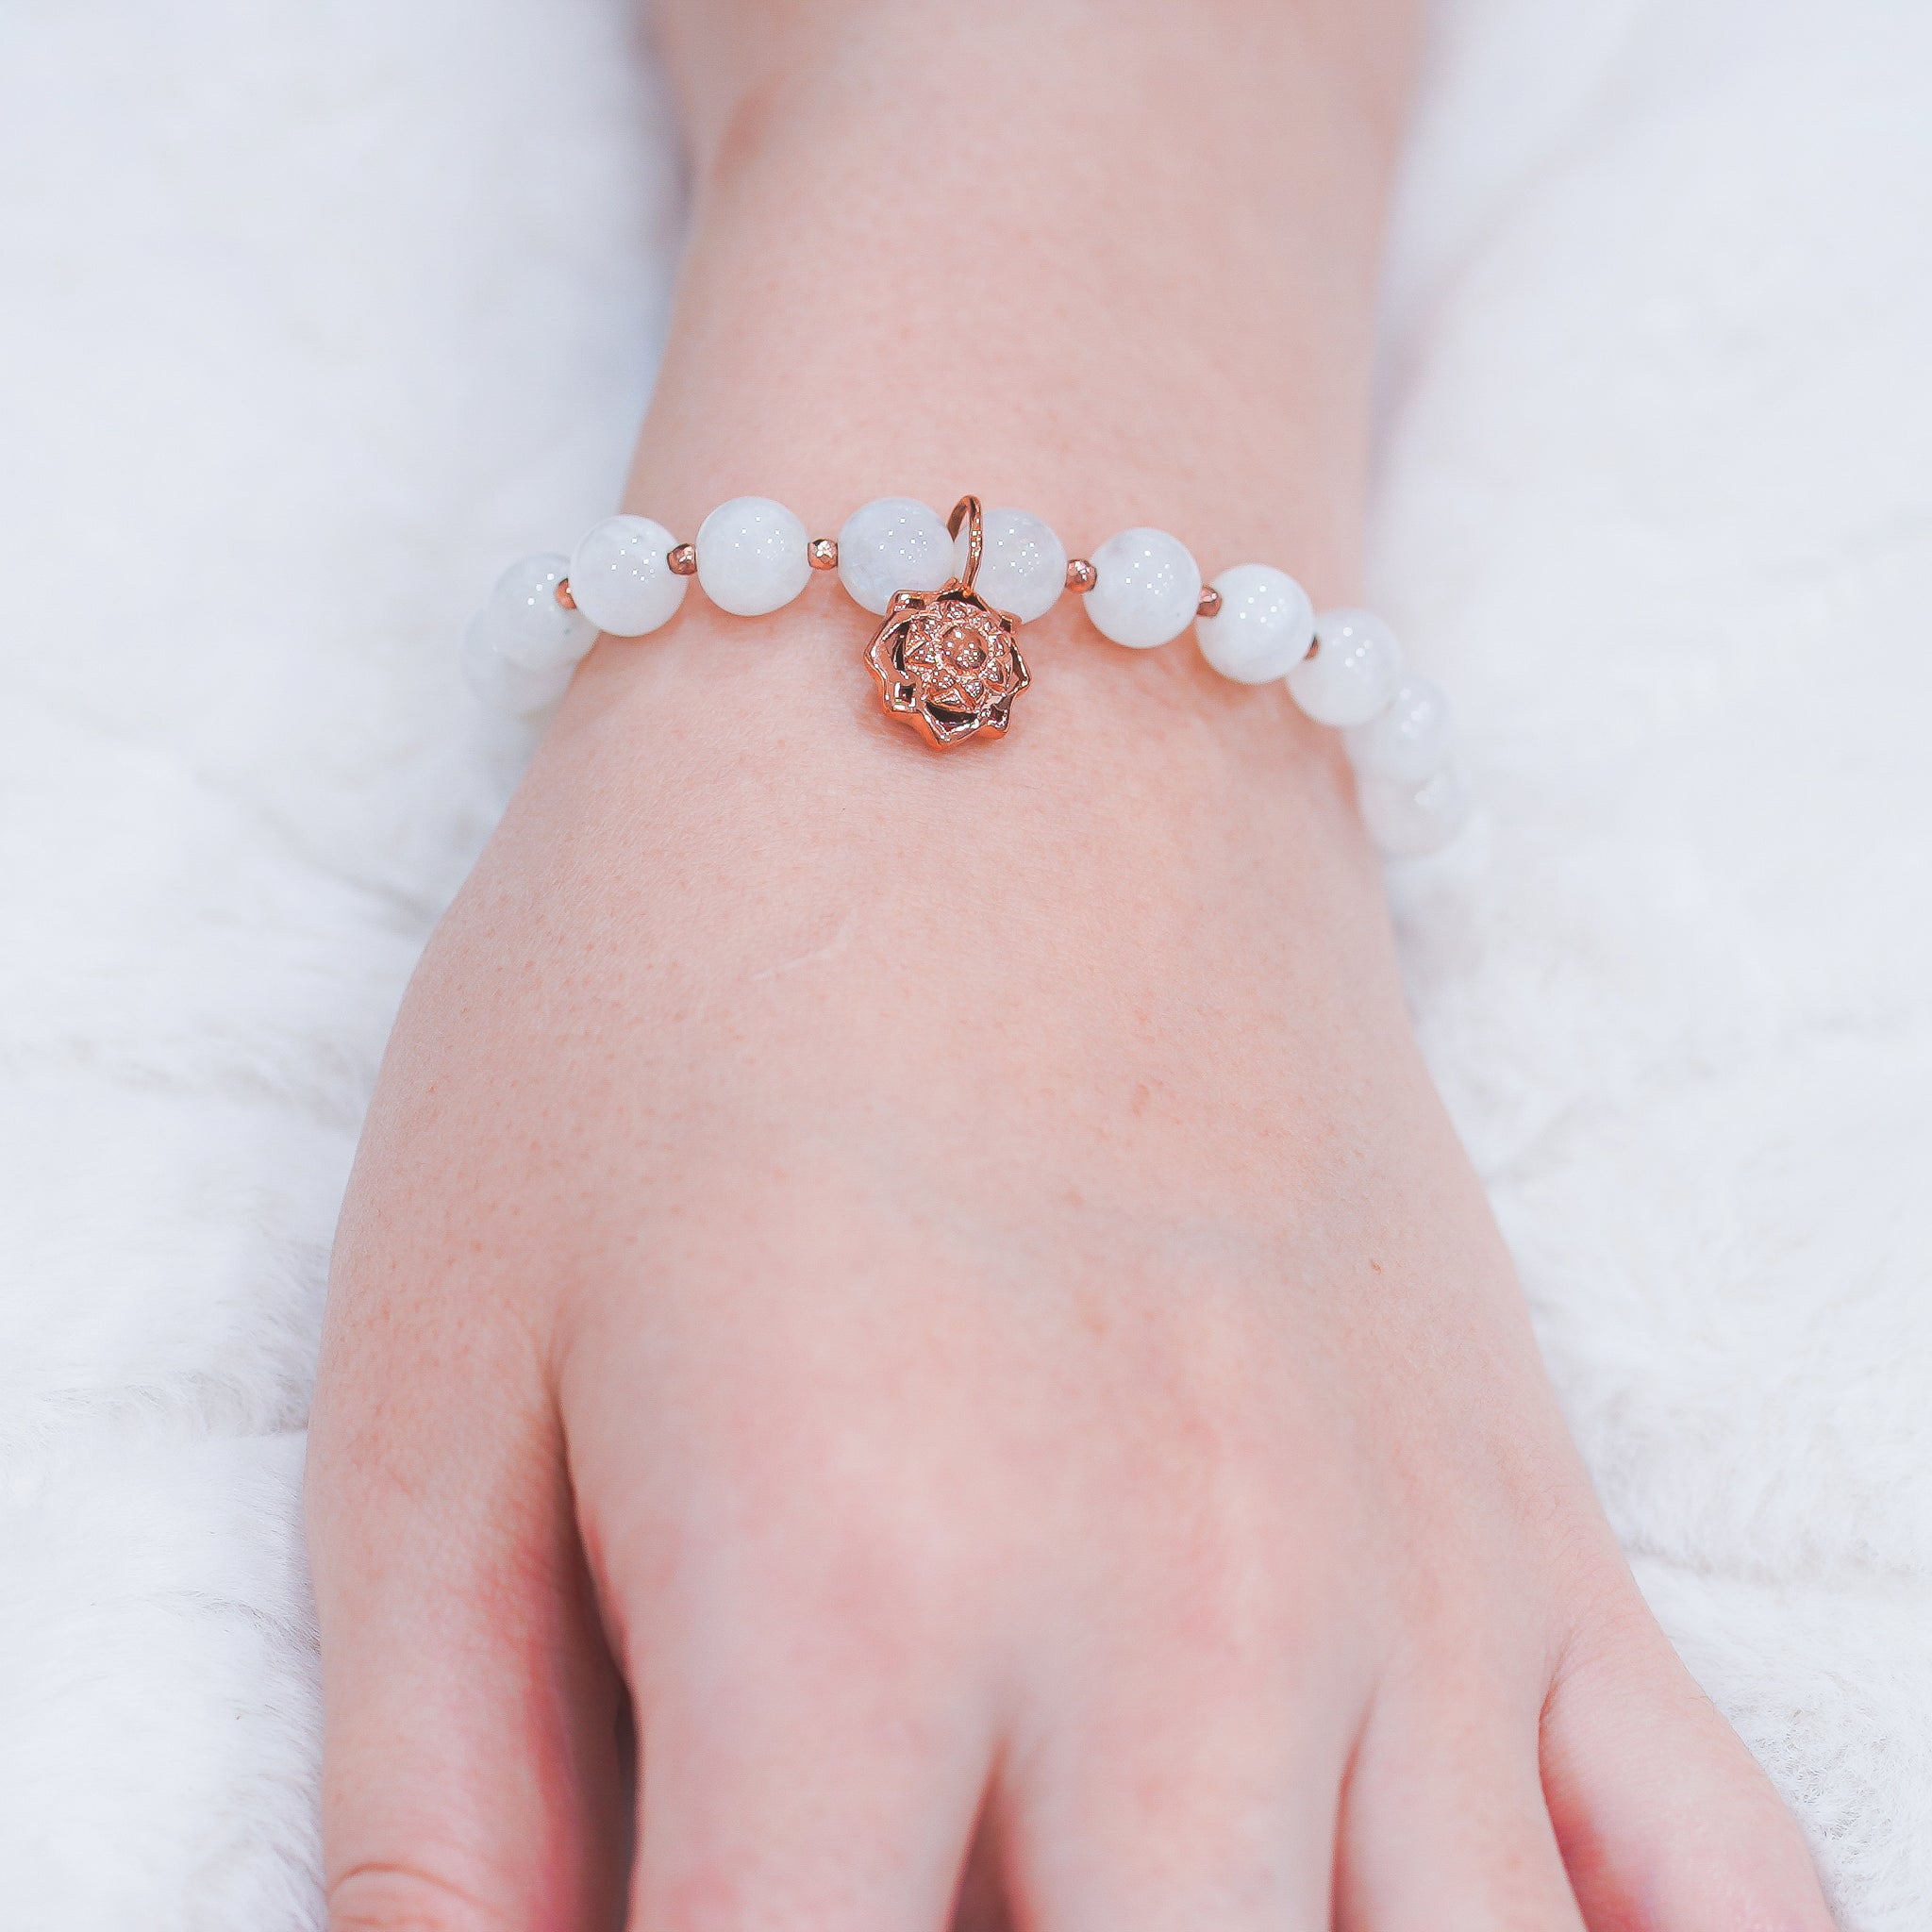 Garden of Desire - Embrace Rainbow Moonstone Bracelet The Embrace Rainbow Moonstone Bracelet features the stone of introspection and reflection, Rainbow moonstone is believed to promote tranquillity, stability intuition and inspiration.